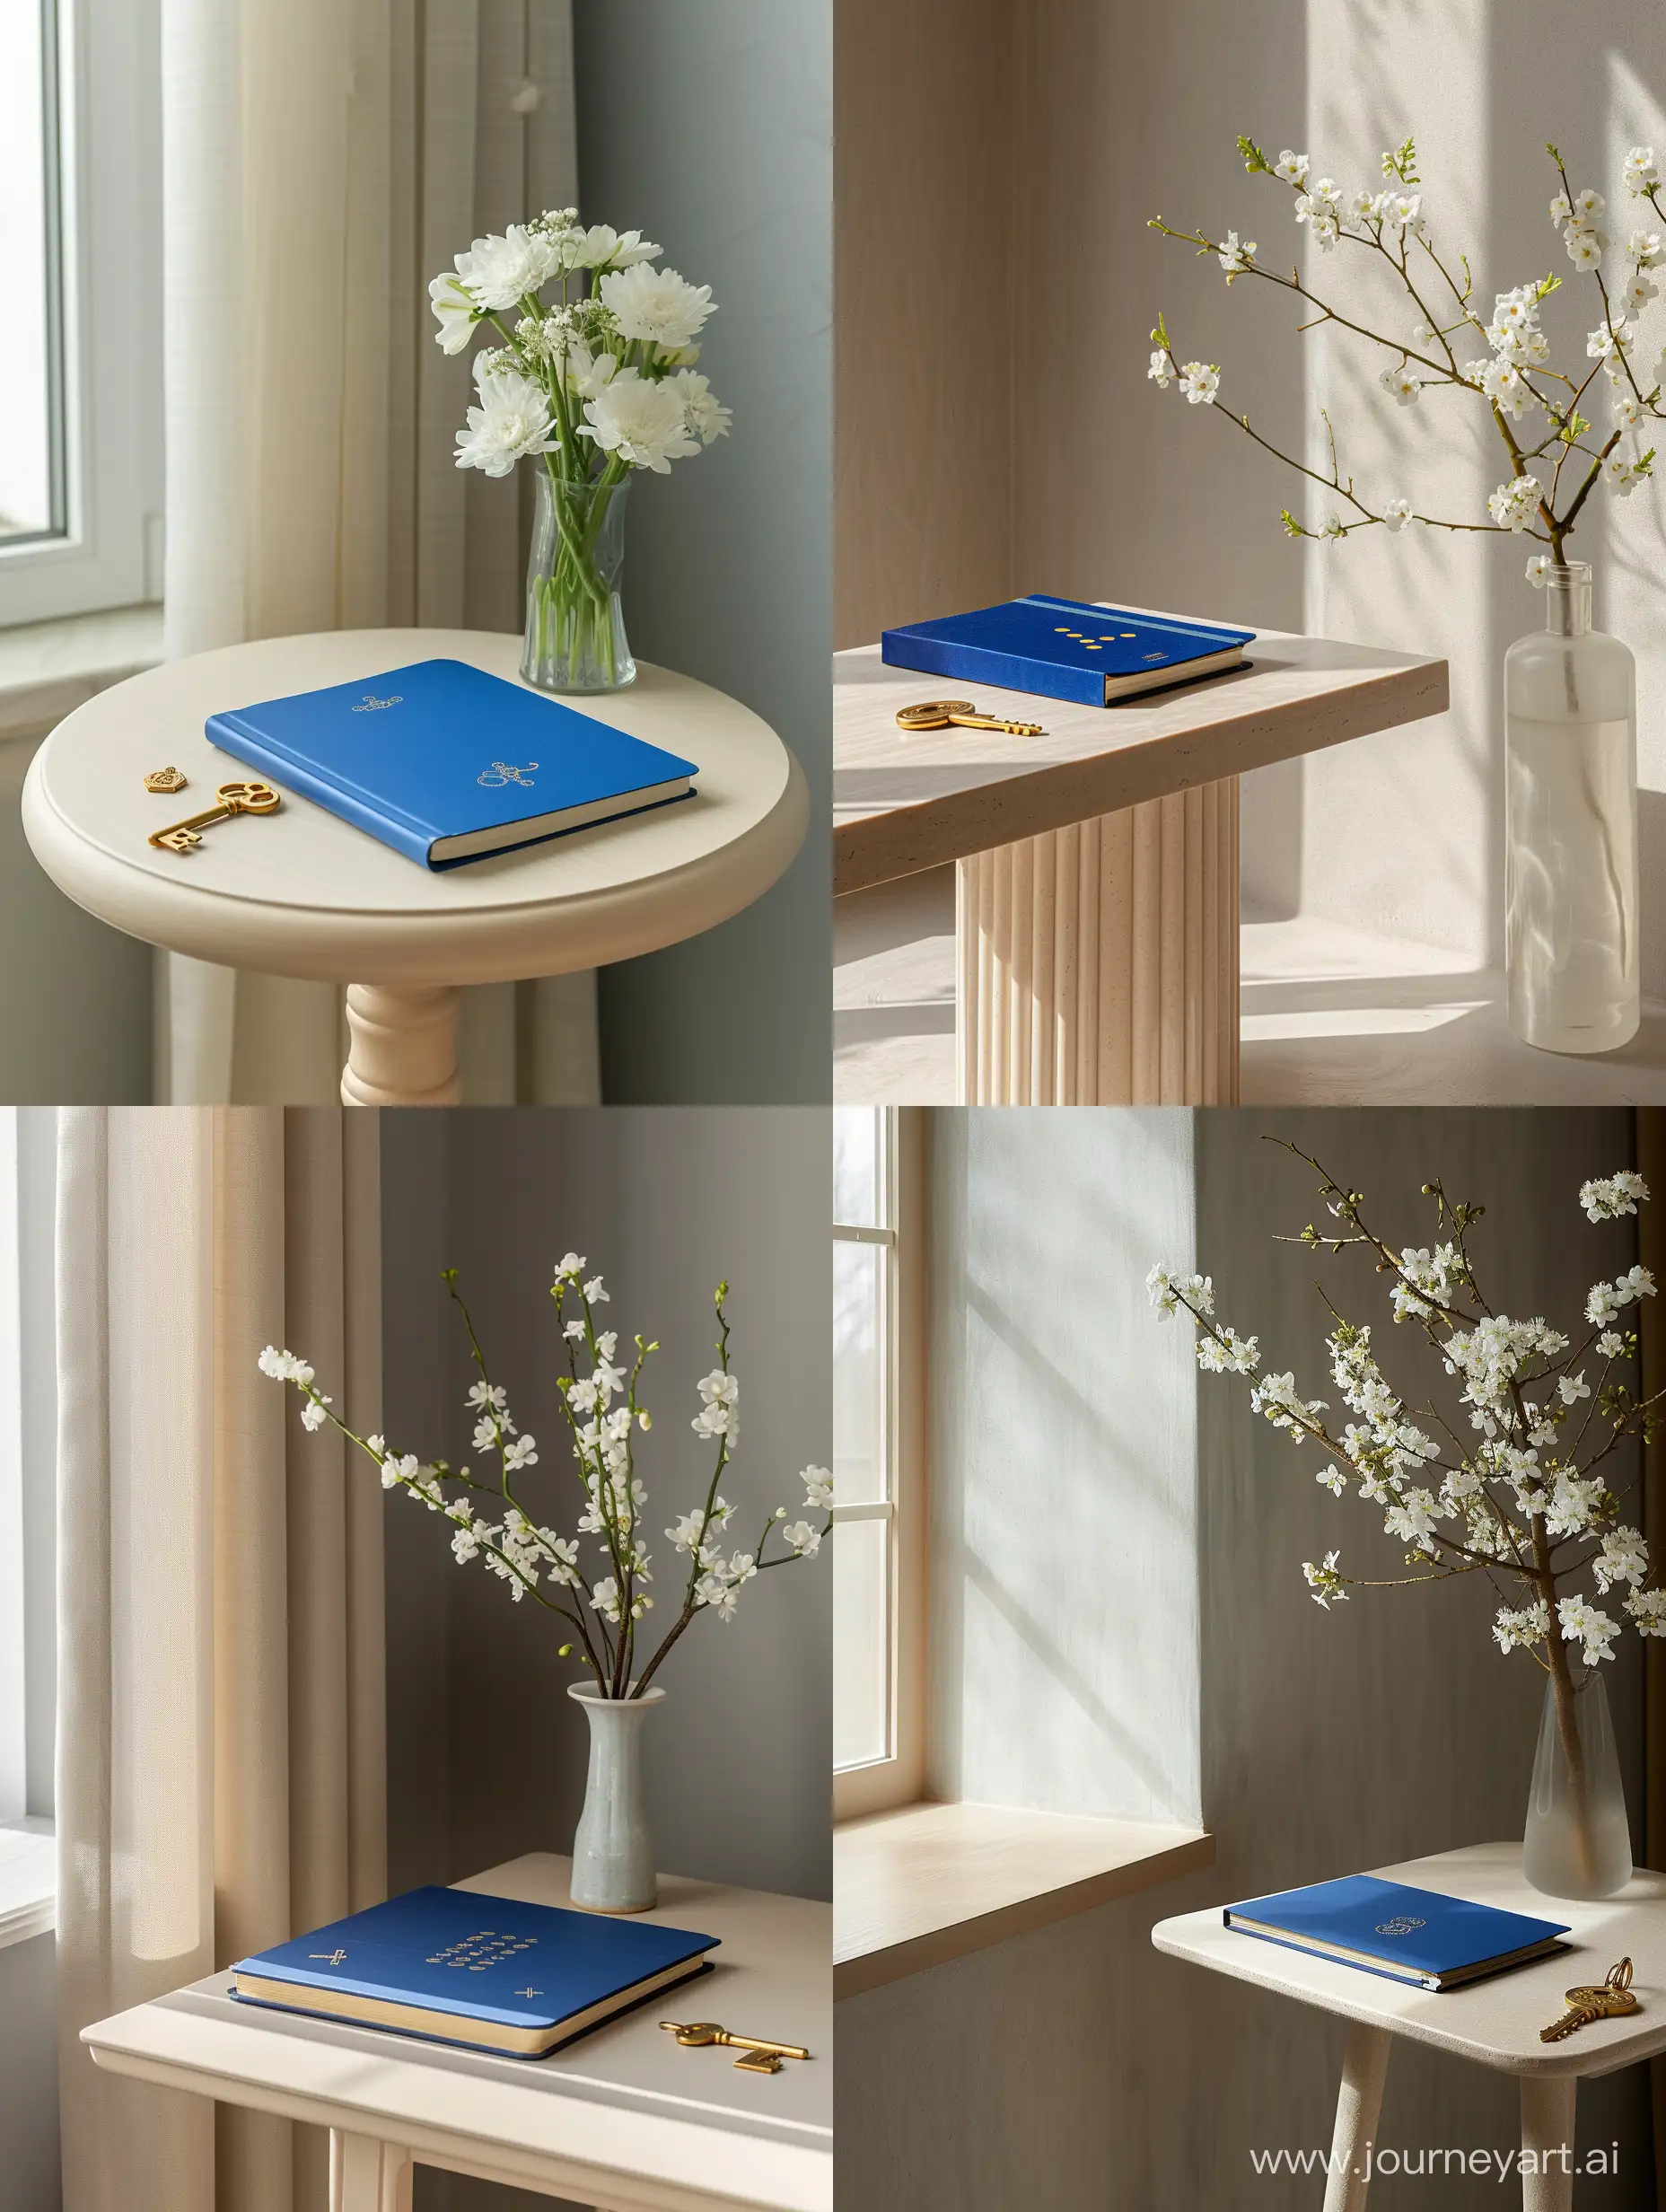 A light-colored table is on it, it stands by the window, there is a blue numerologist's notebook on it, there is a golden key, there are white flowers in a vase. The main background is gray-beige